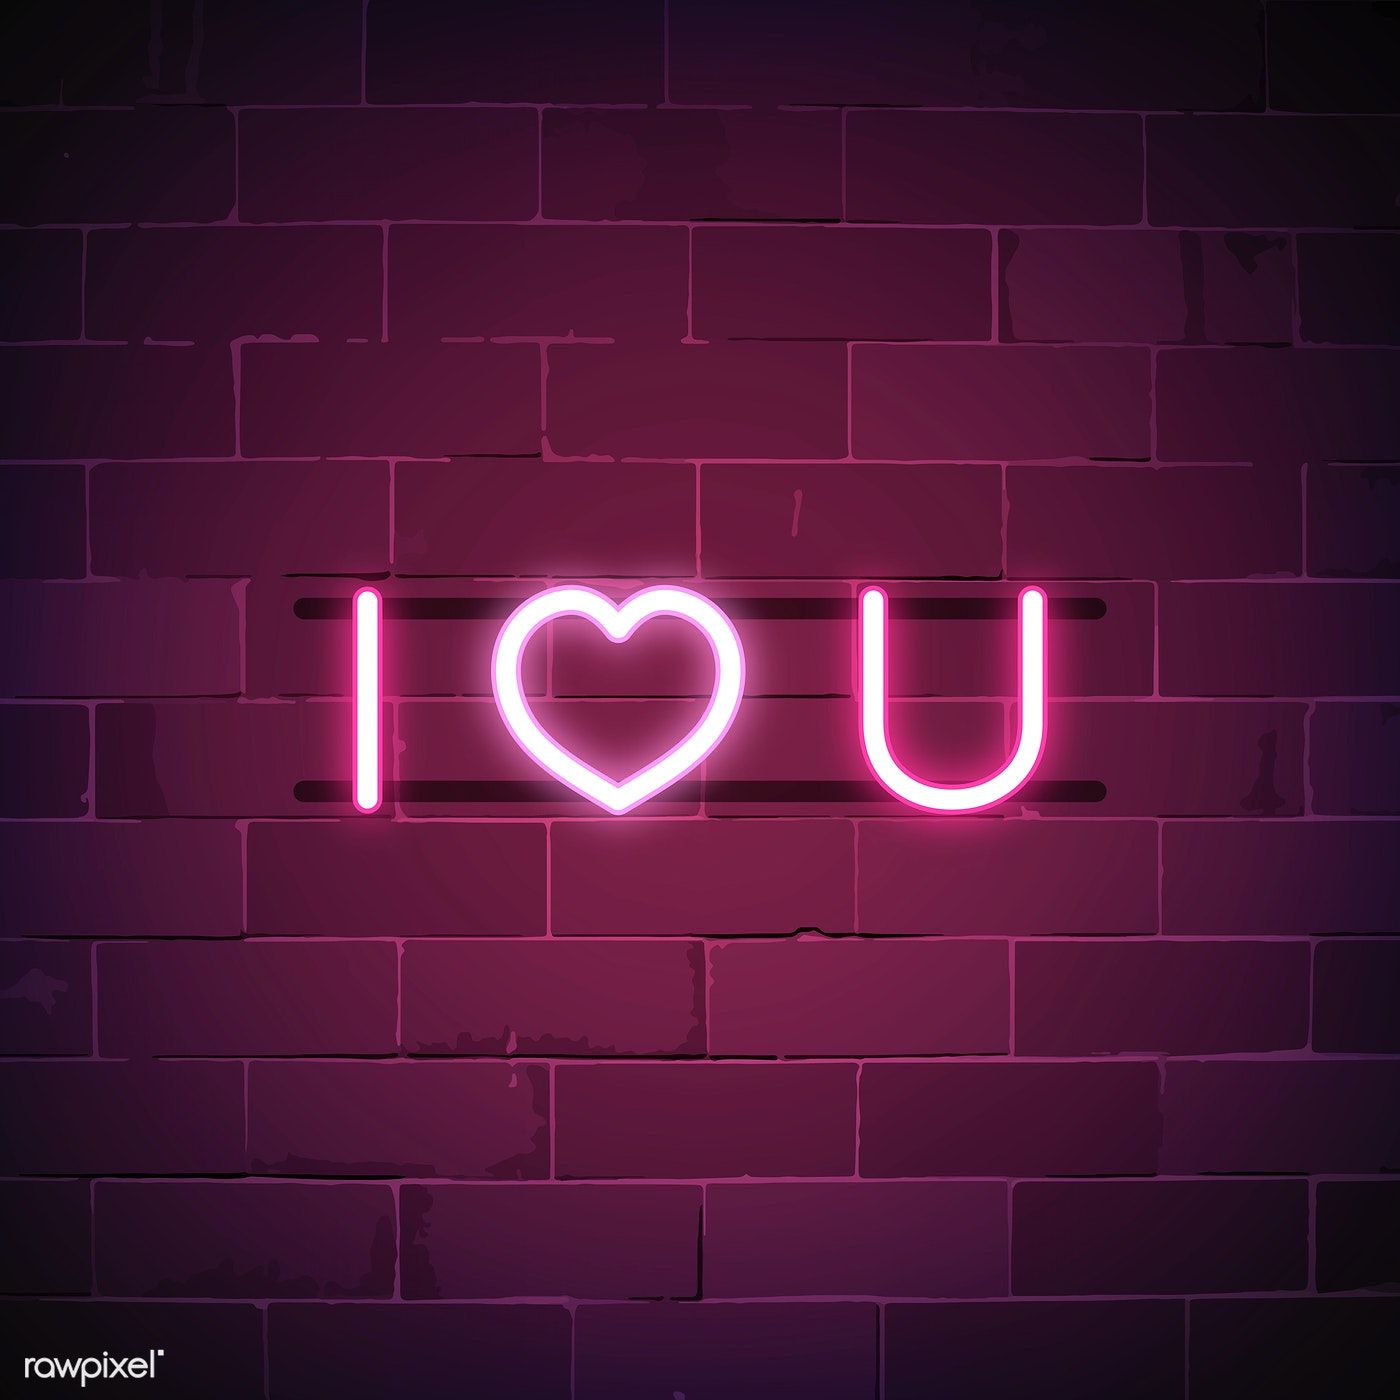 I love you neon sign vector. free image / NingZk V. Neon signs, Neon aesthetic, Neon words